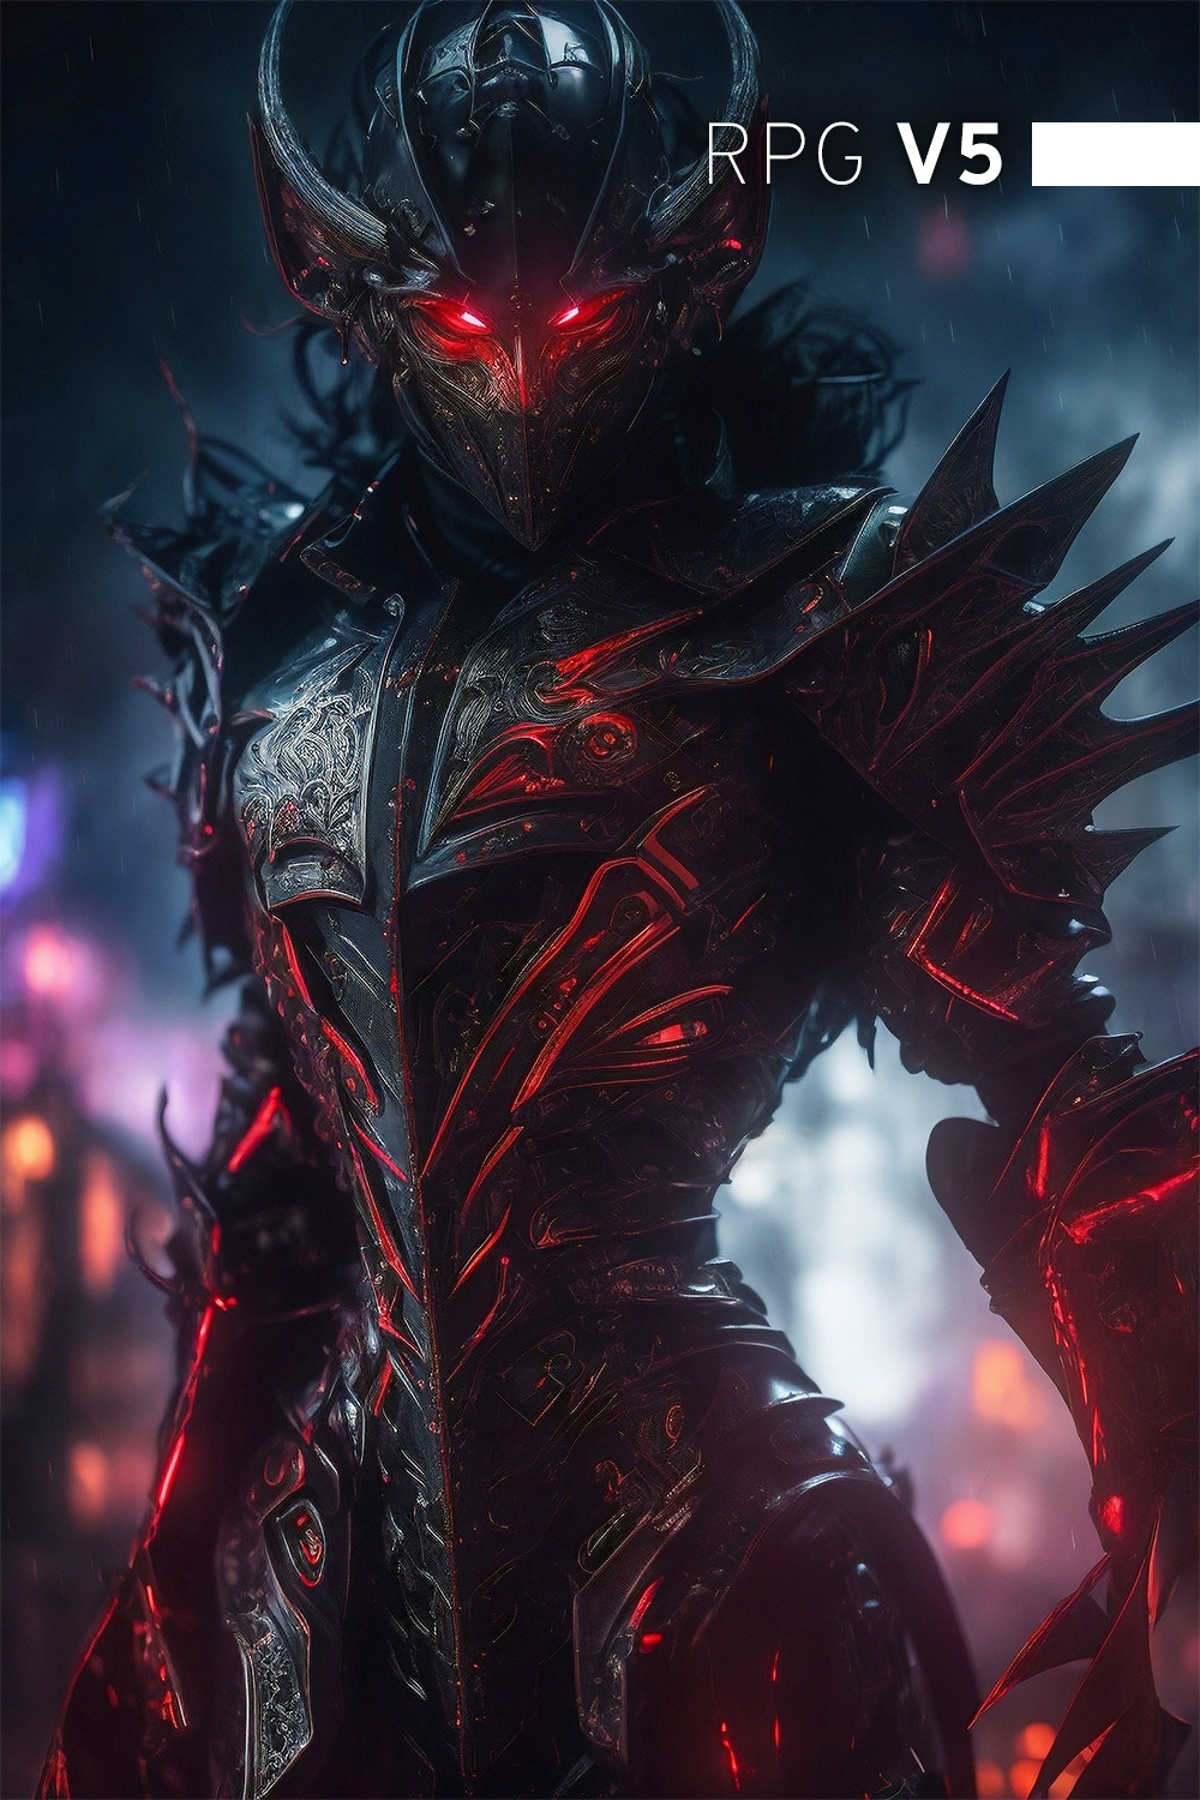 A warrior in a black and red armor standing in a dark, rainy environment.